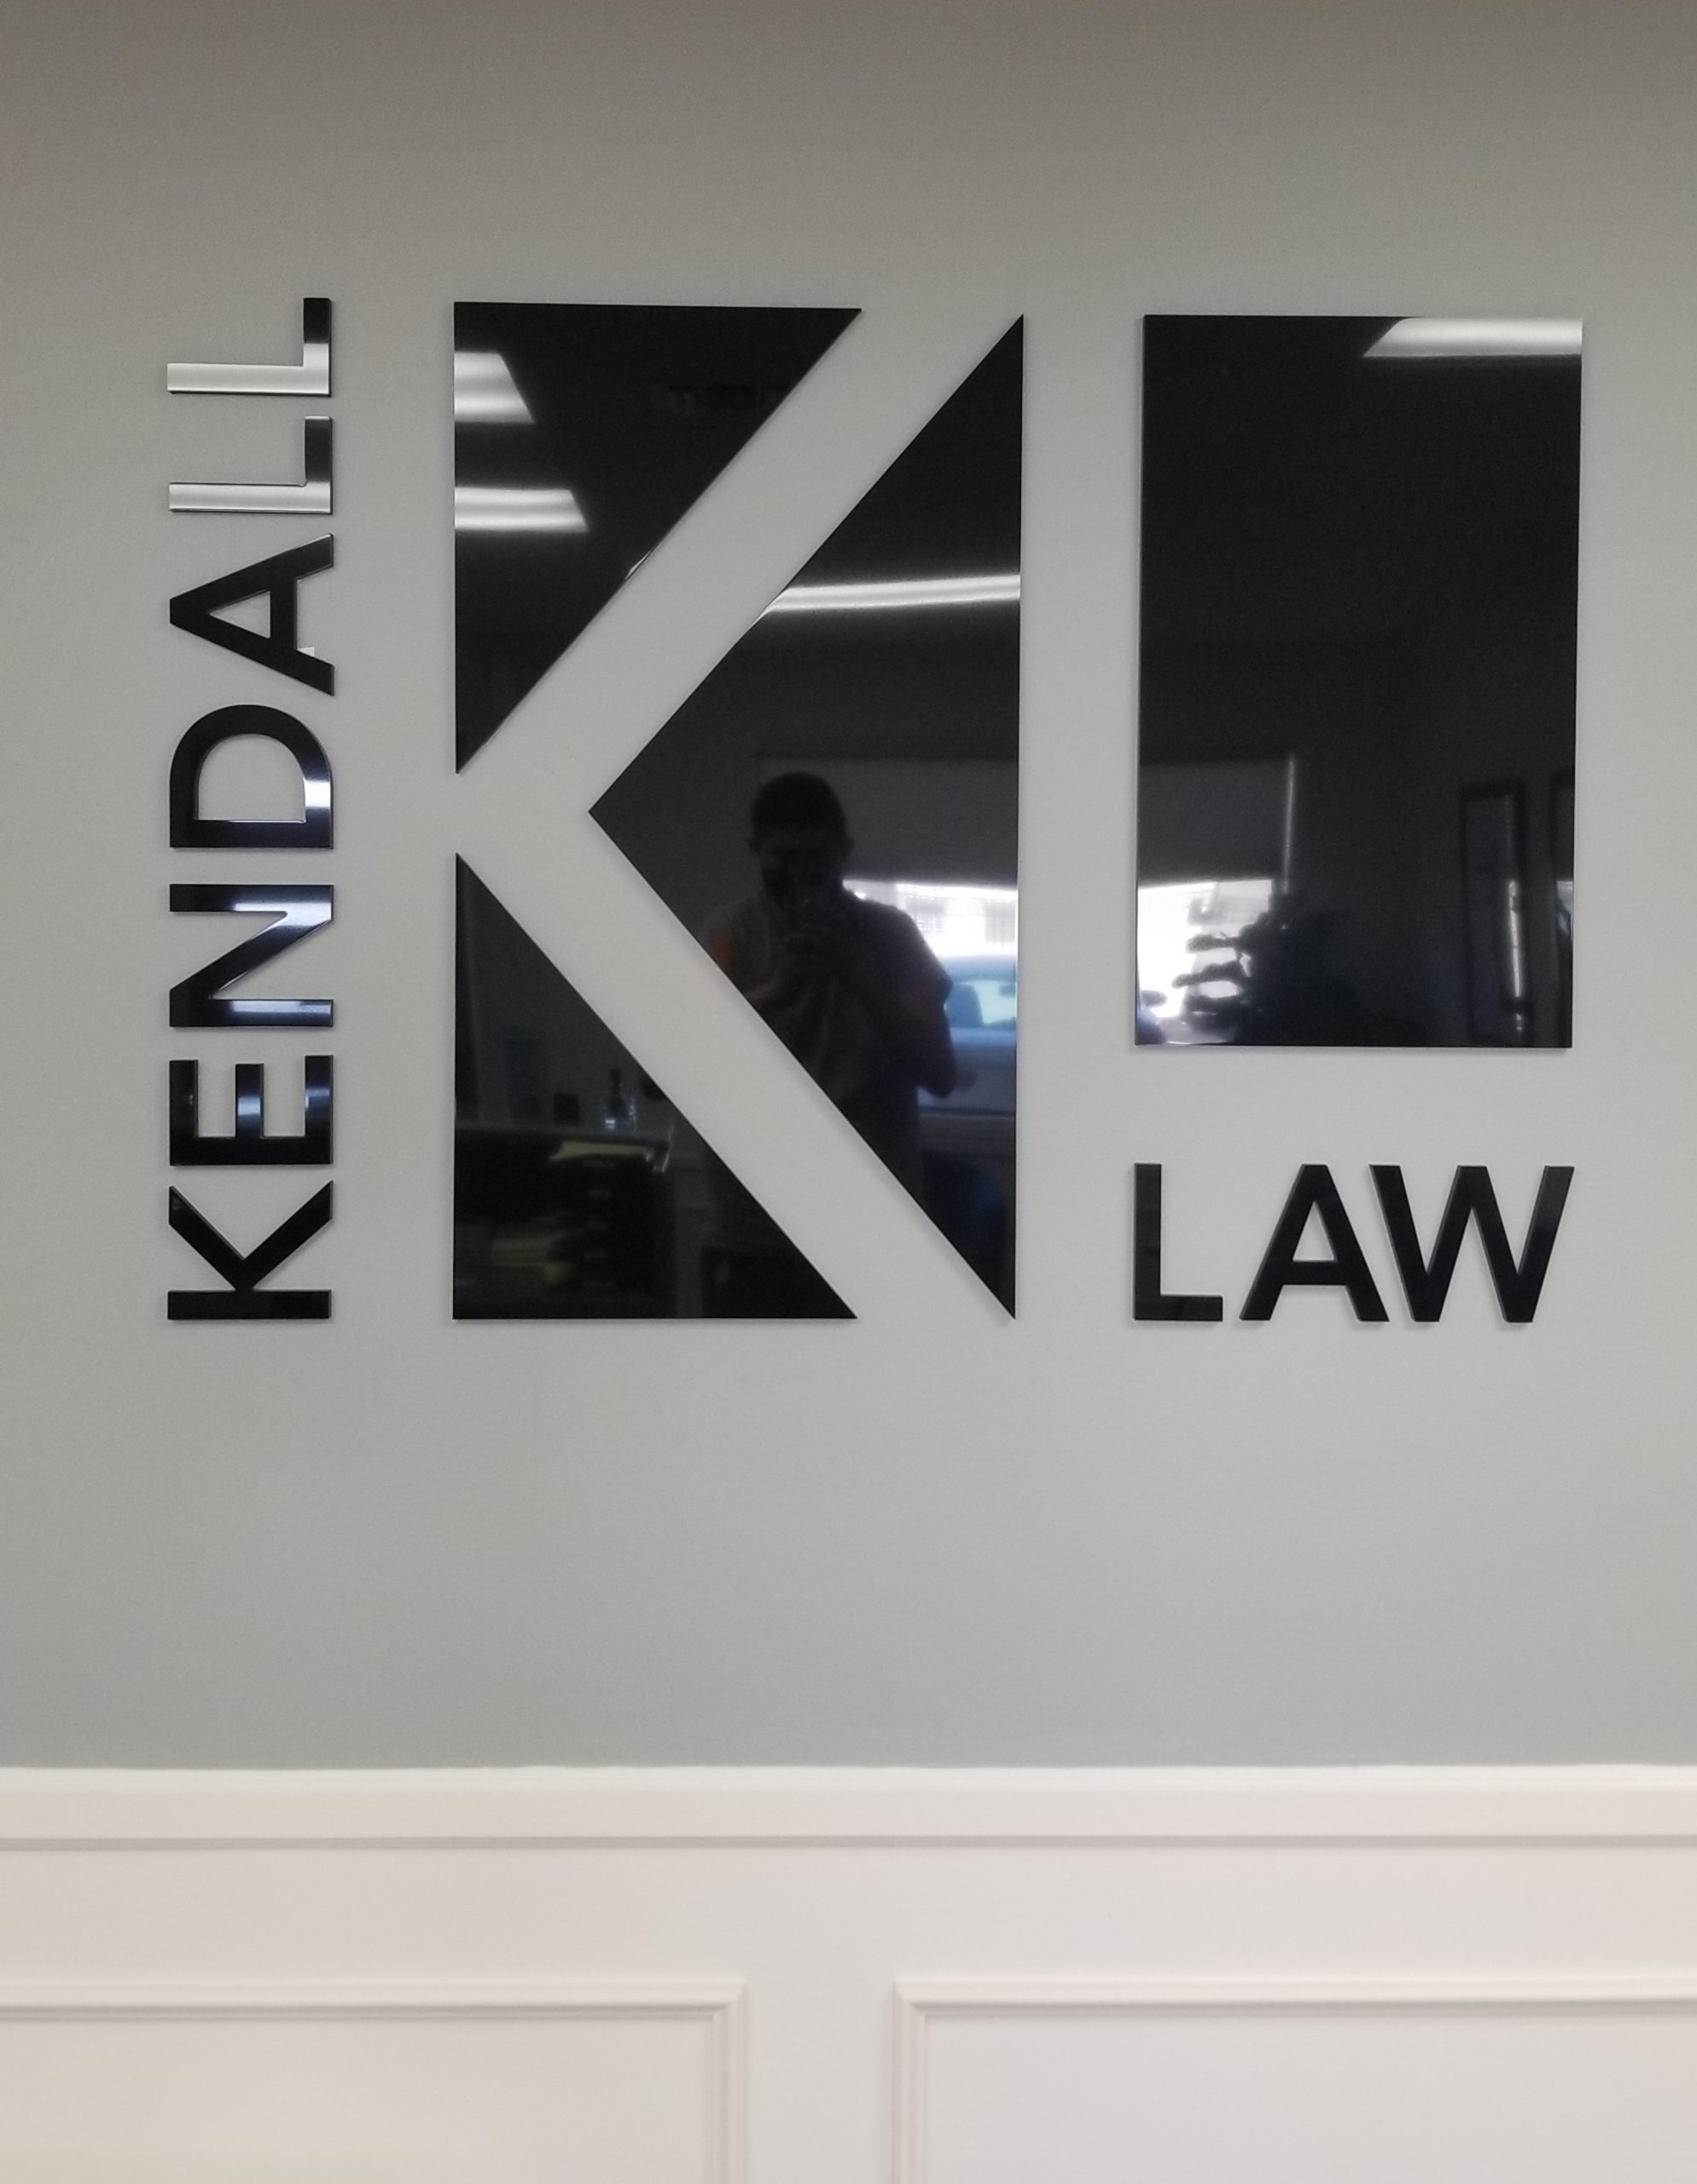 This is the law office lobby sign for Kendall Law. With this, the Torrance firm has a prominent centerpiece in their reception area.